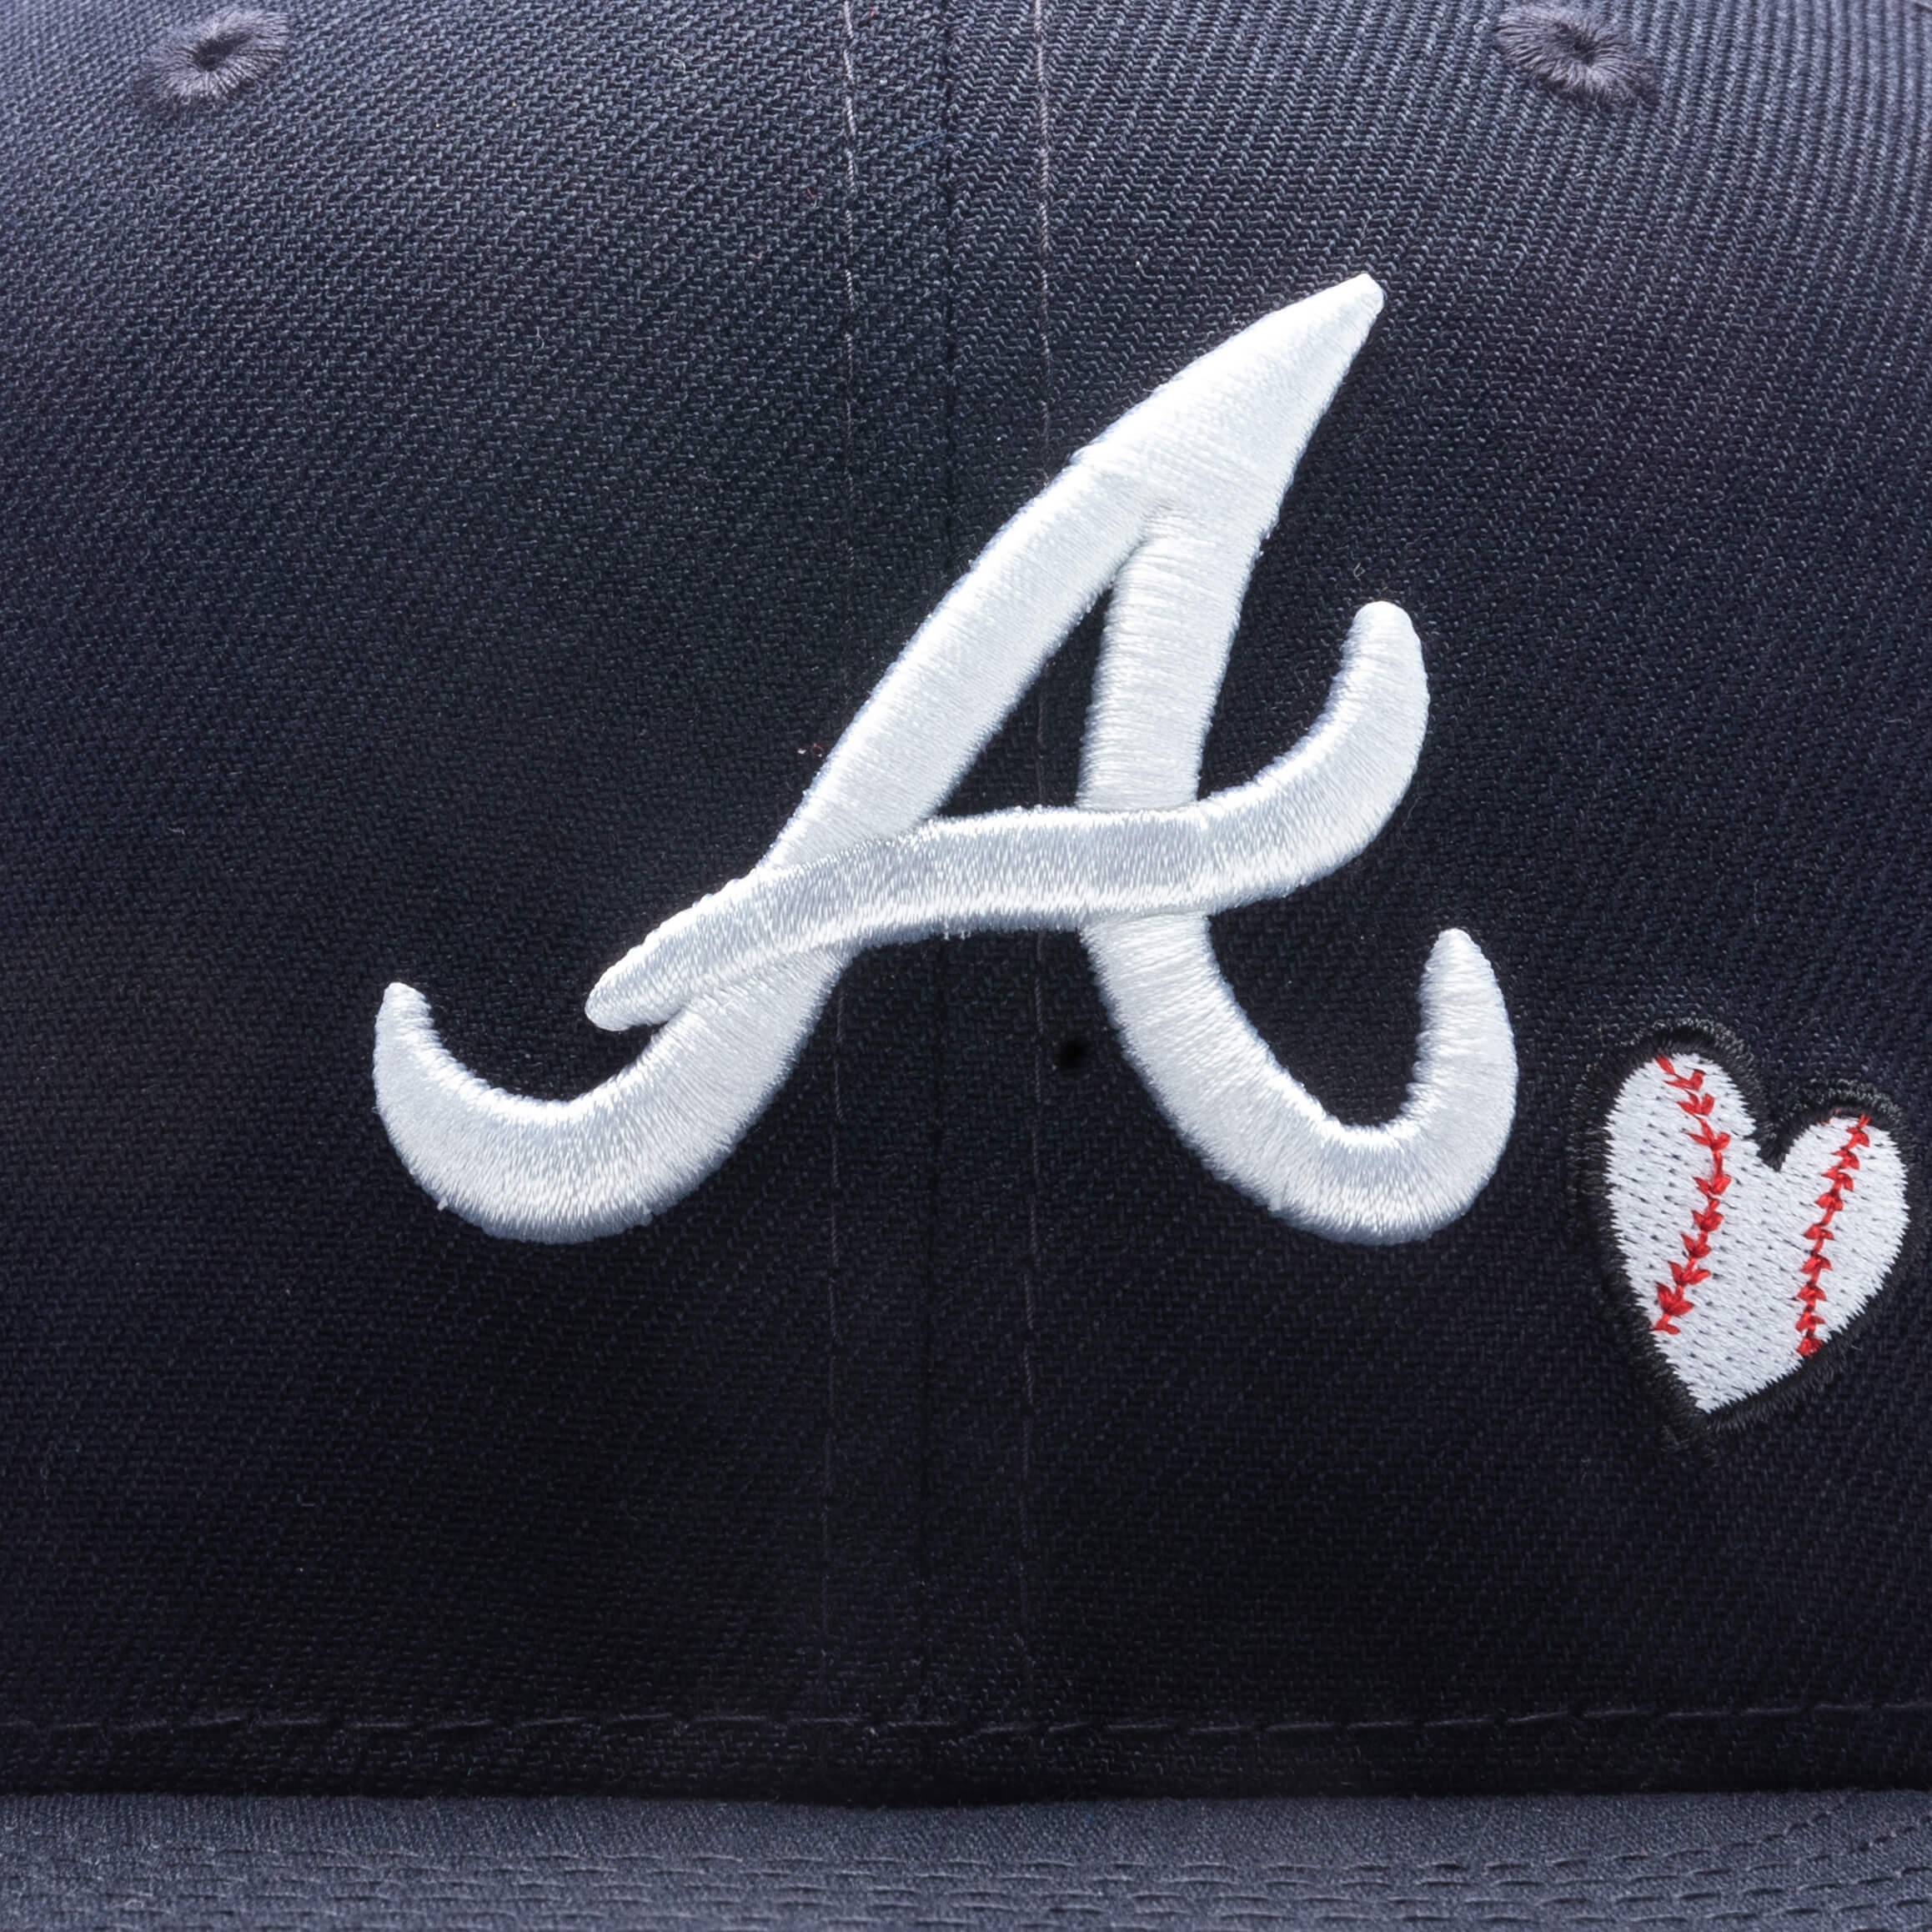 New Era Atlanta Braves Team Heart 2022 59FIFTY Fitted Hat